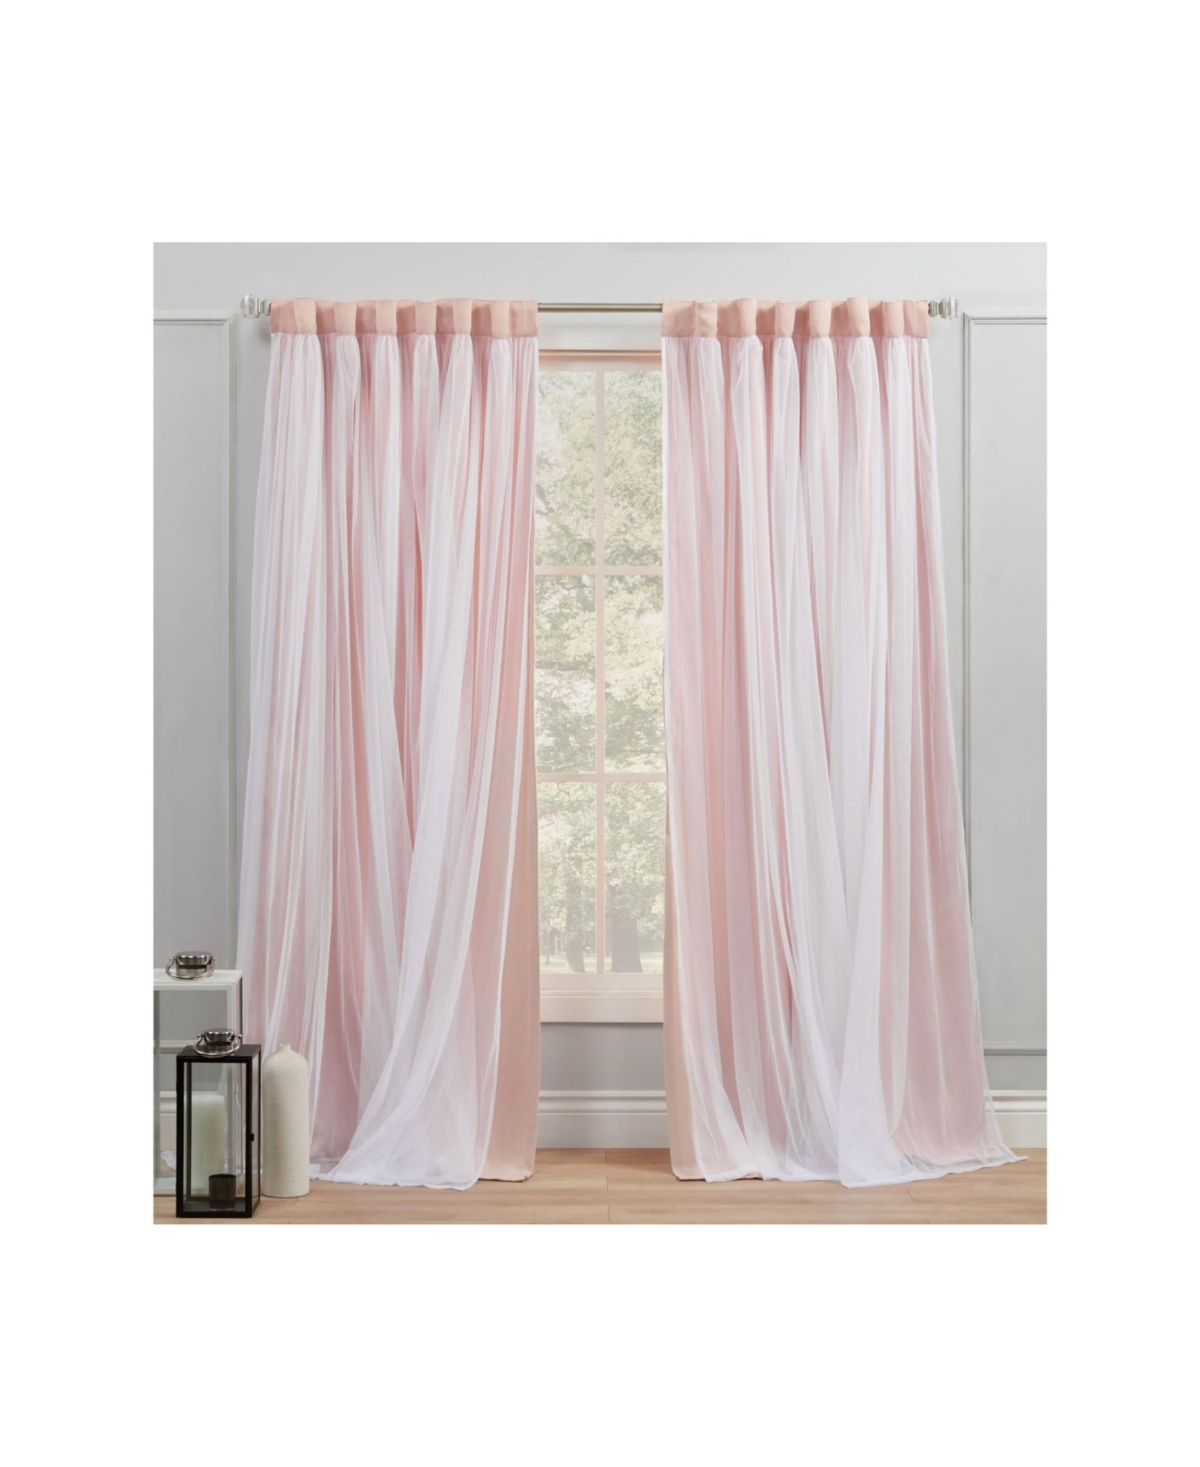 Exclusive Home Curtains Catarina Layered Solid Blackout And Sheer Grommet Top Curtain Panel Pair, 52" X 84" In Pink